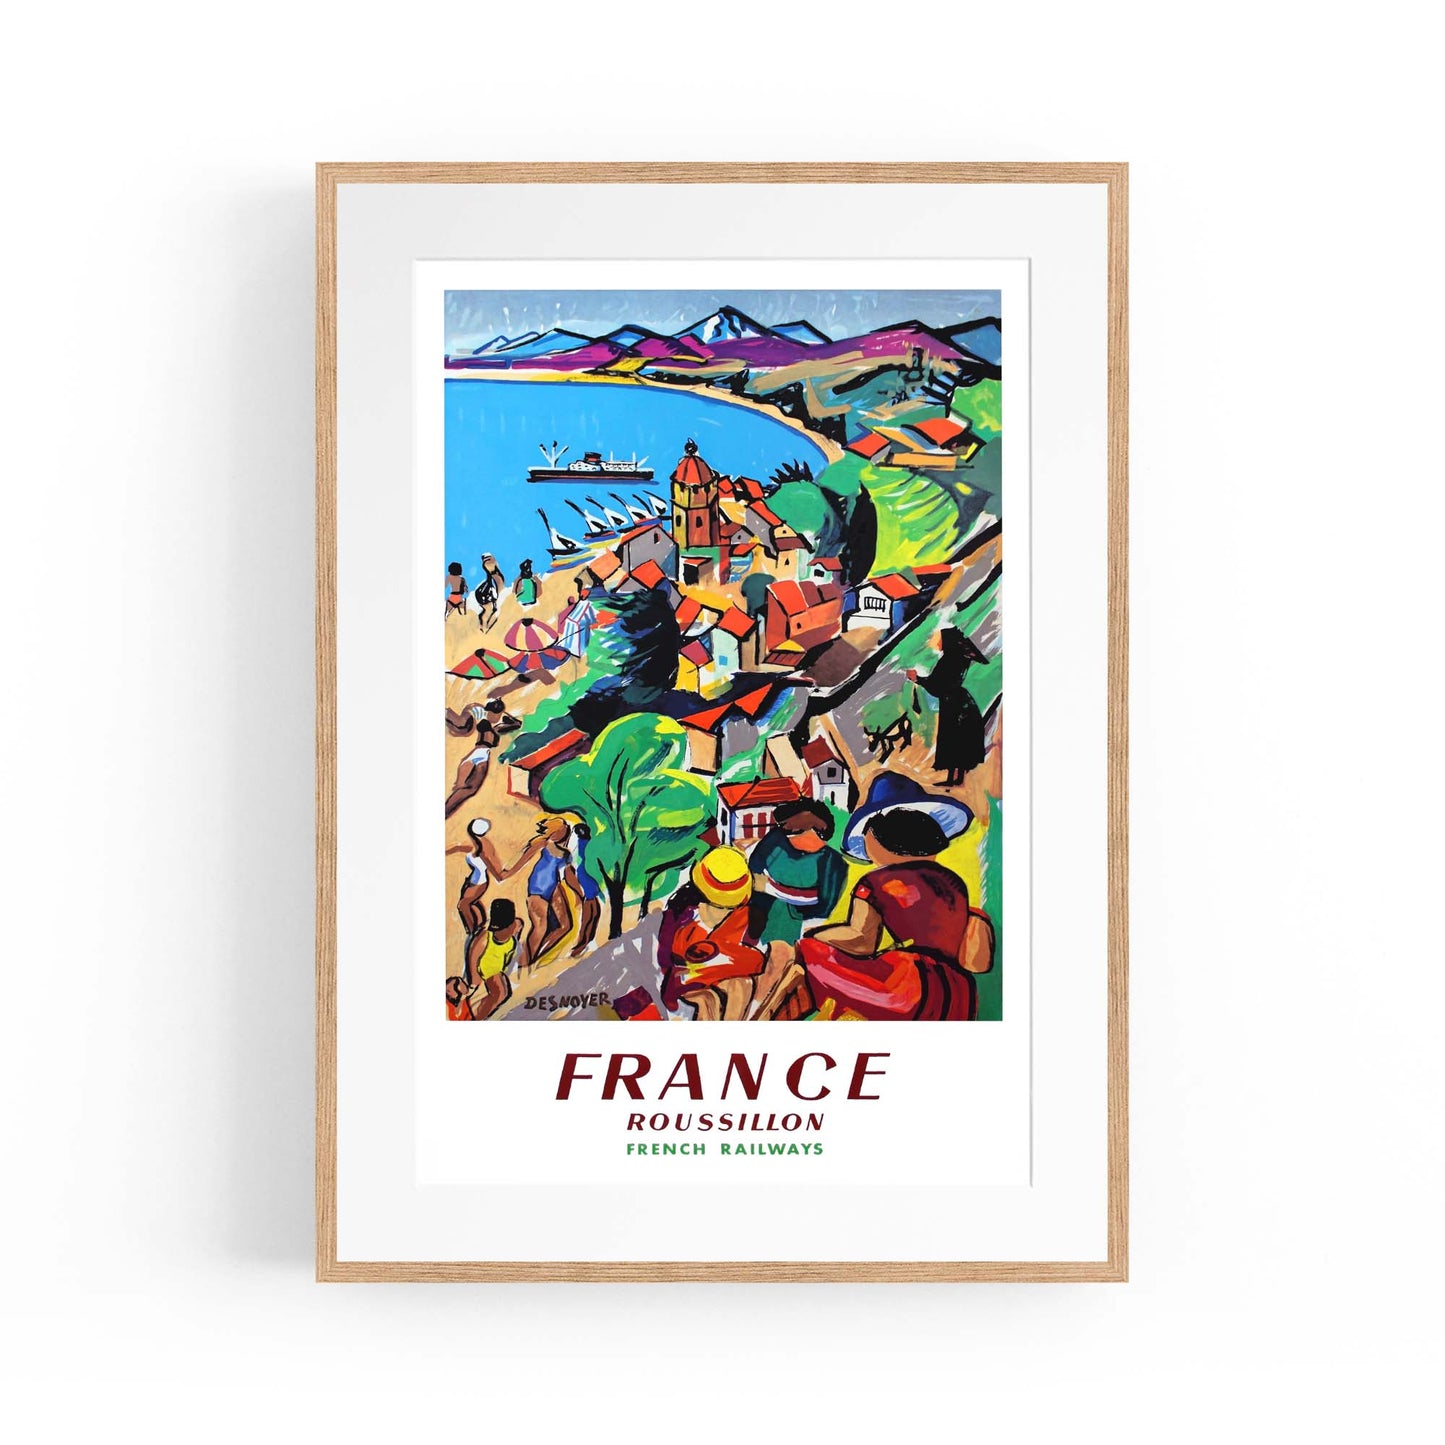 Roussillon France Vintage Travel Advert Wall Art - The Affordable Art Company